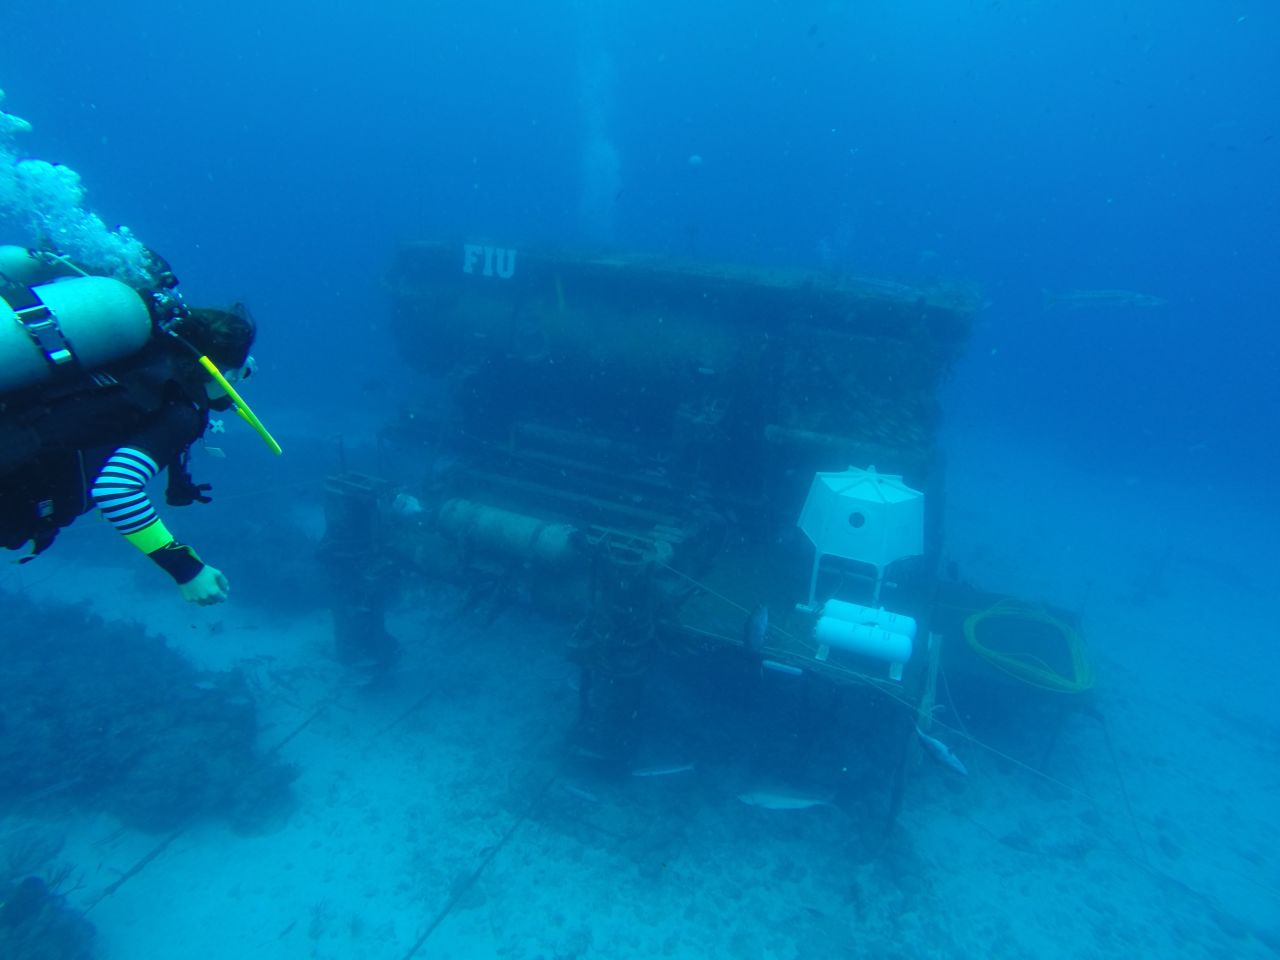 With their Mission 31 project, Fabien Cousteau and a team of researchers are spending what they hope will be 31 straight days in this undersea habitat, 63 feet beneath the ocean surface in the Florida Keys.